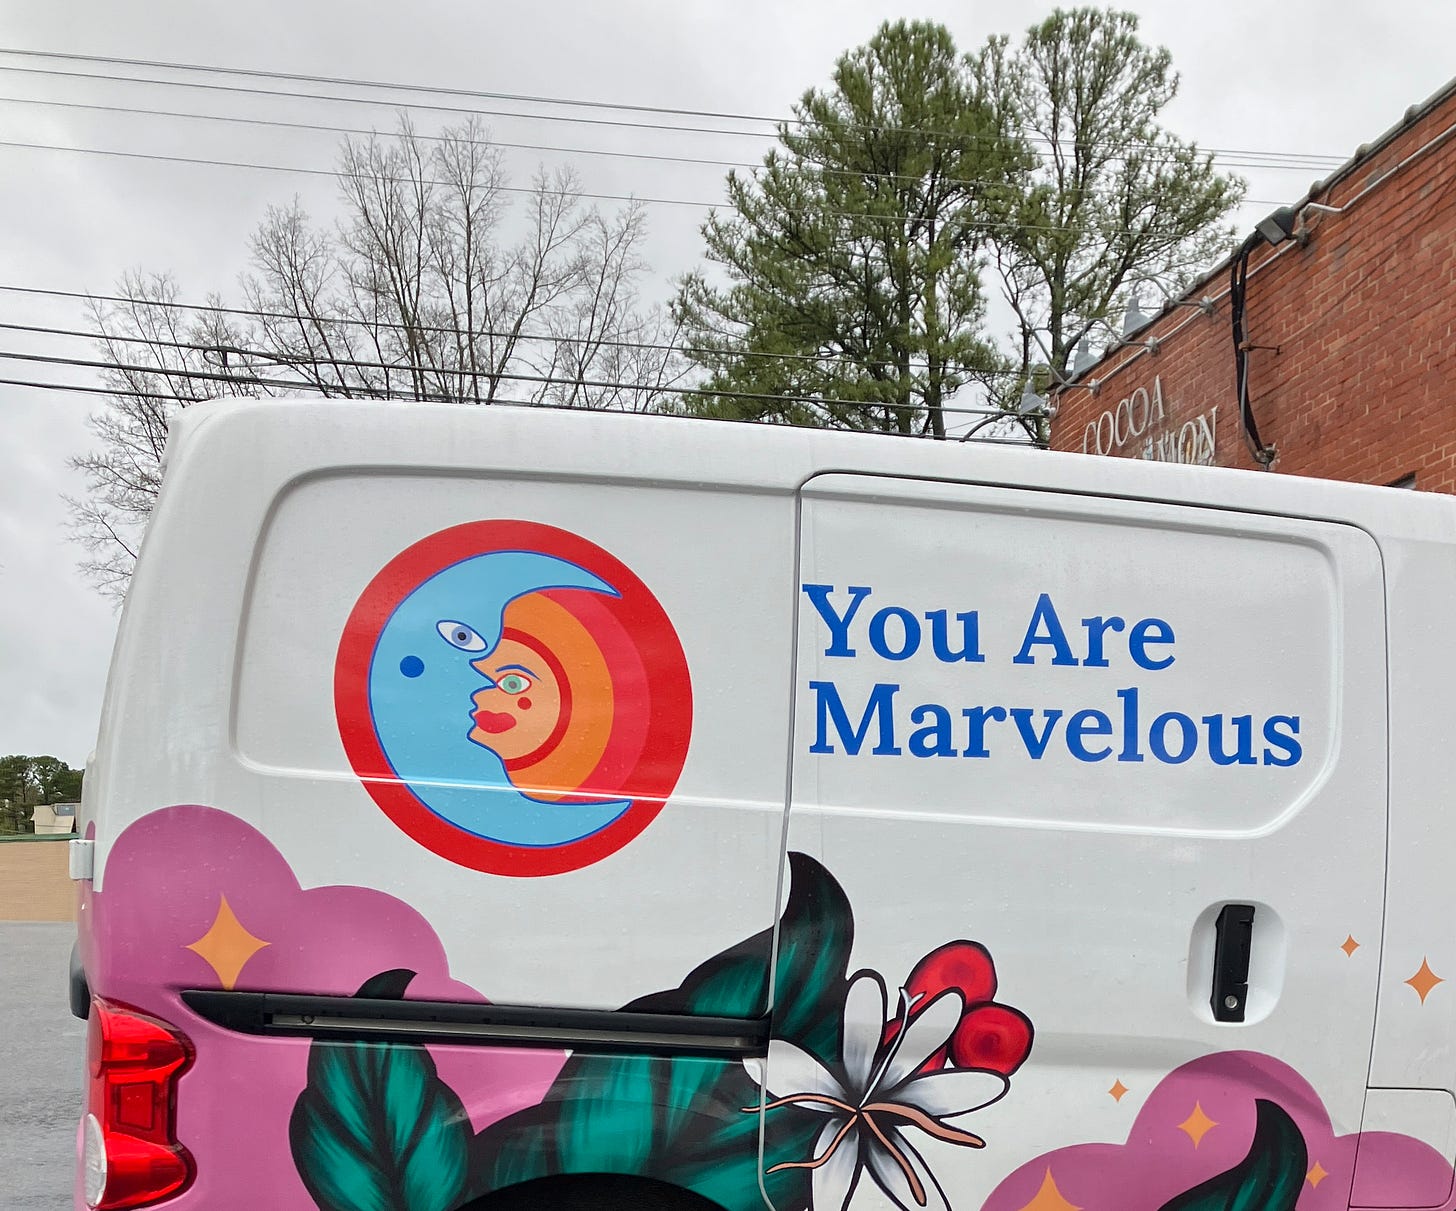 You are marvelous written on the side of a white van with illustration of flowers and plants